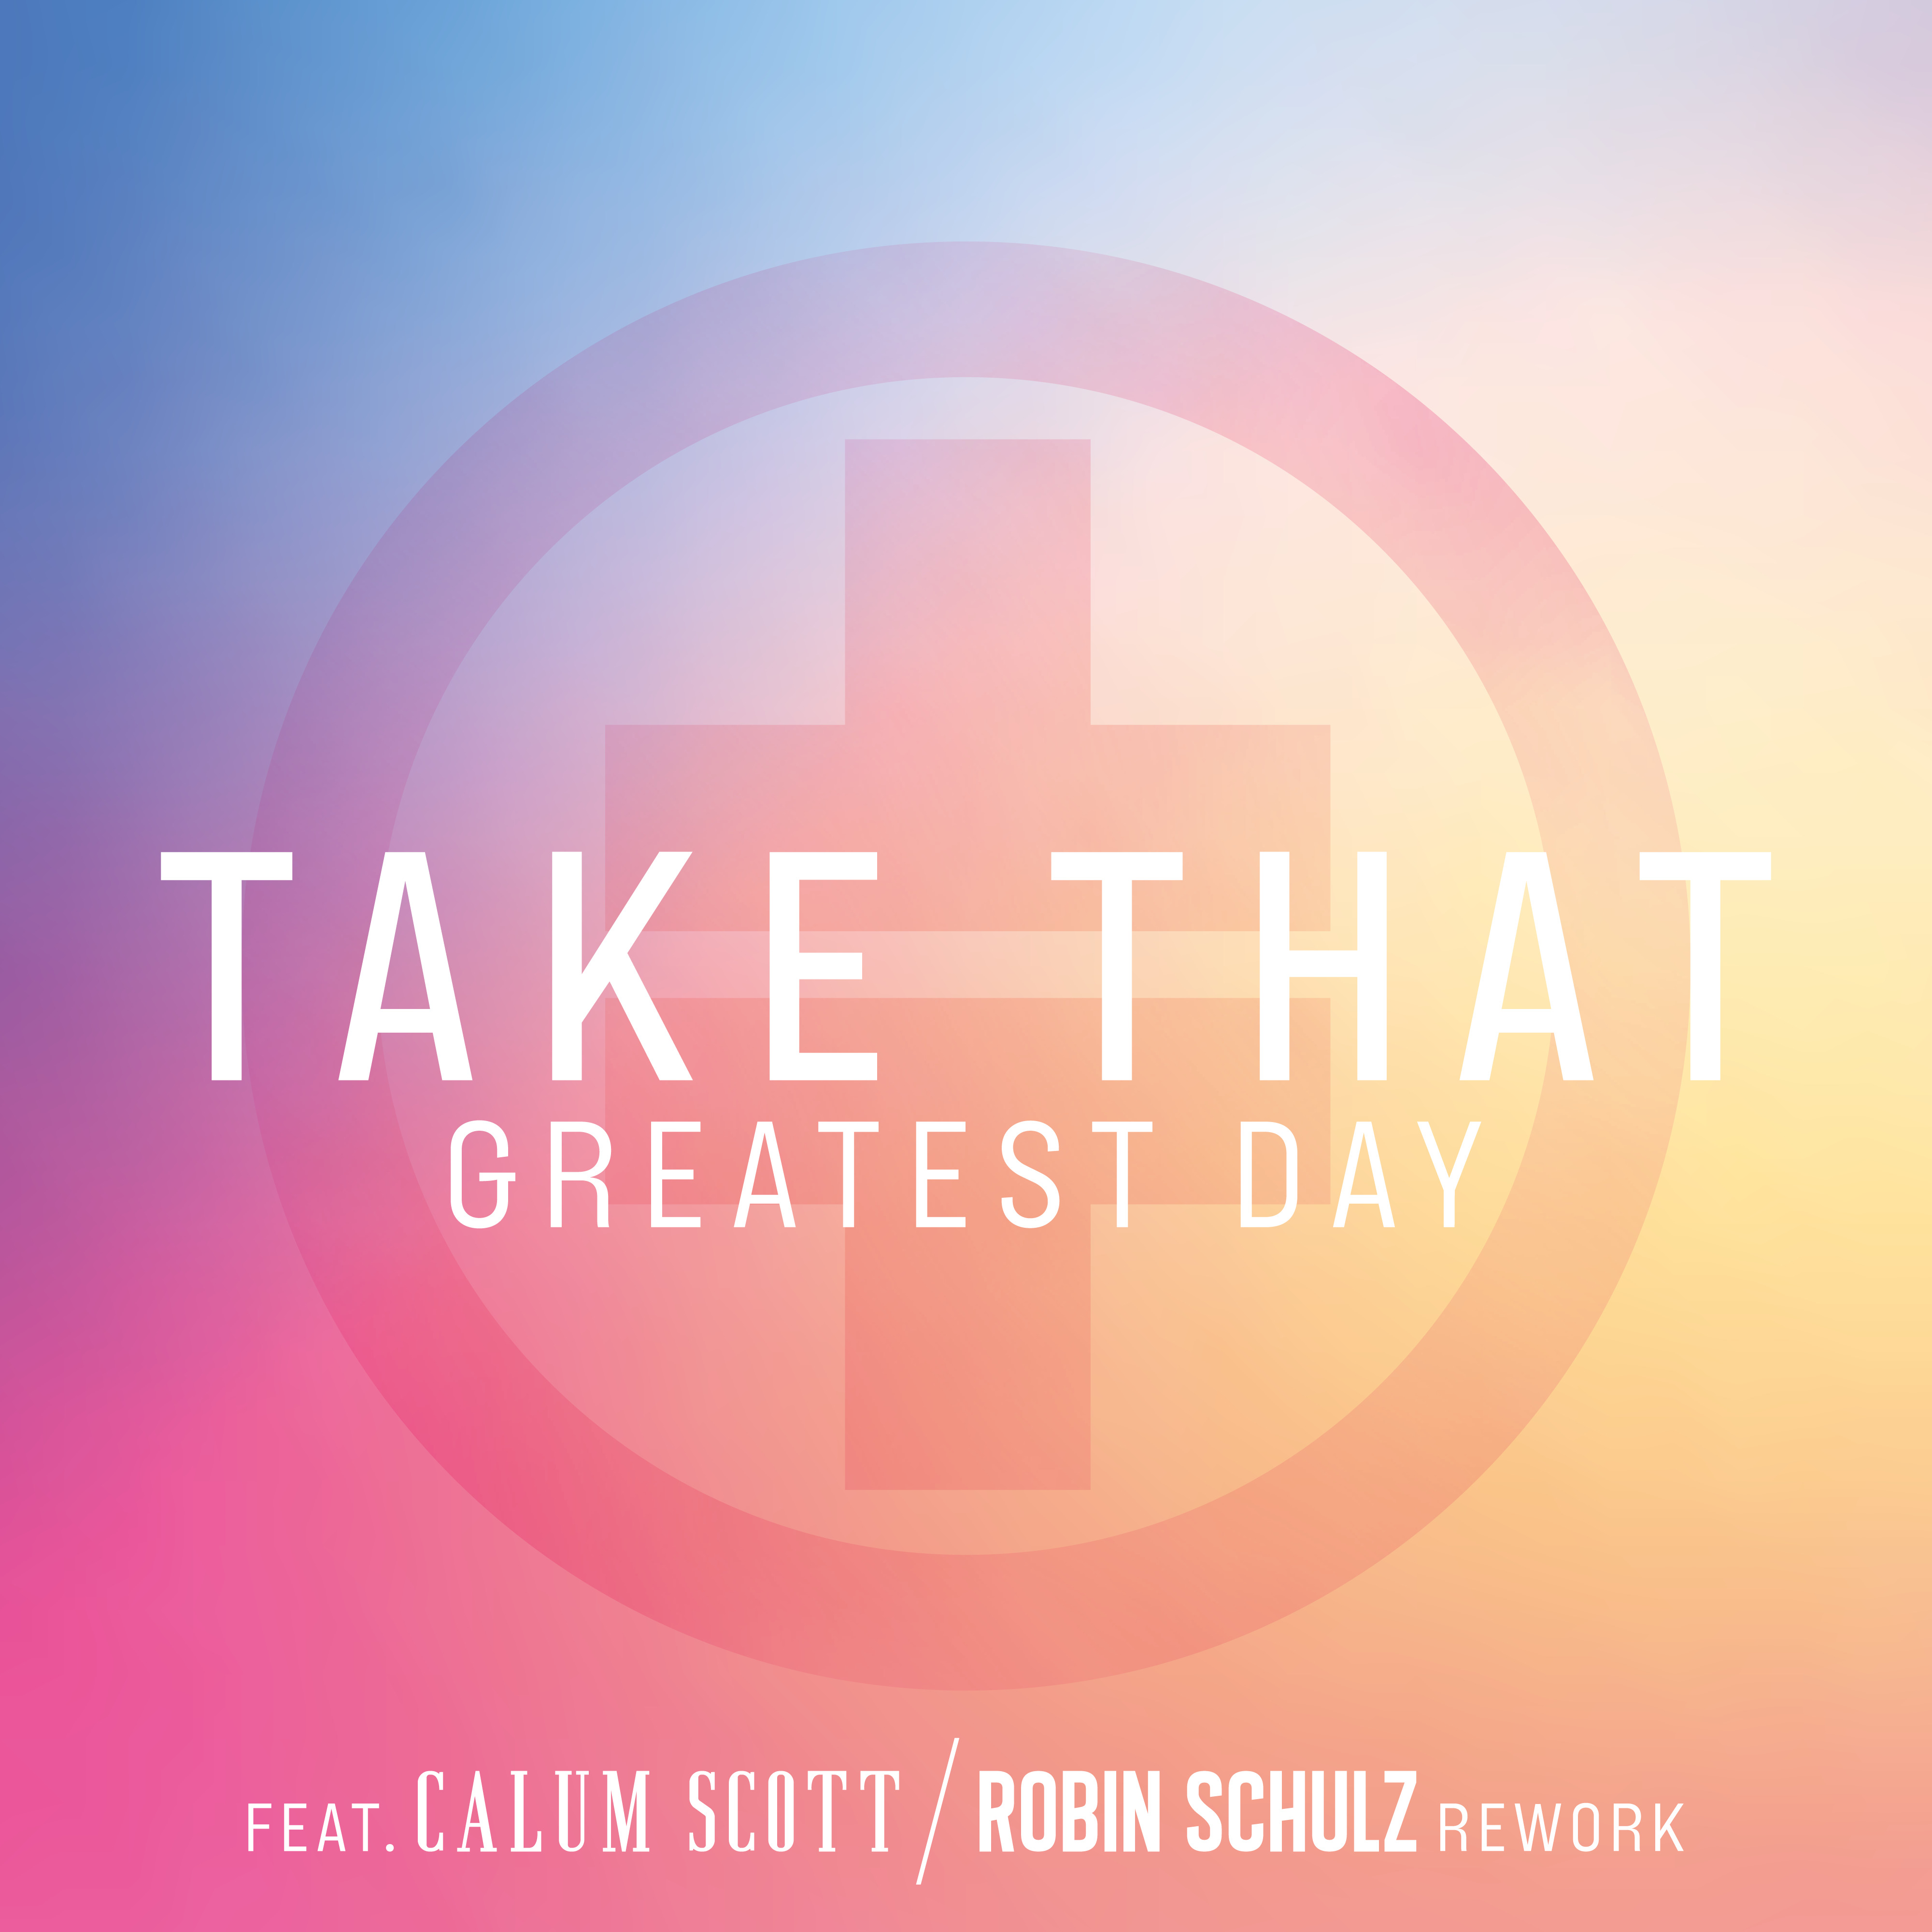 Take That ft. featuring Calum Scott Greatest Day (Robin Schulz Rework) cover artwork